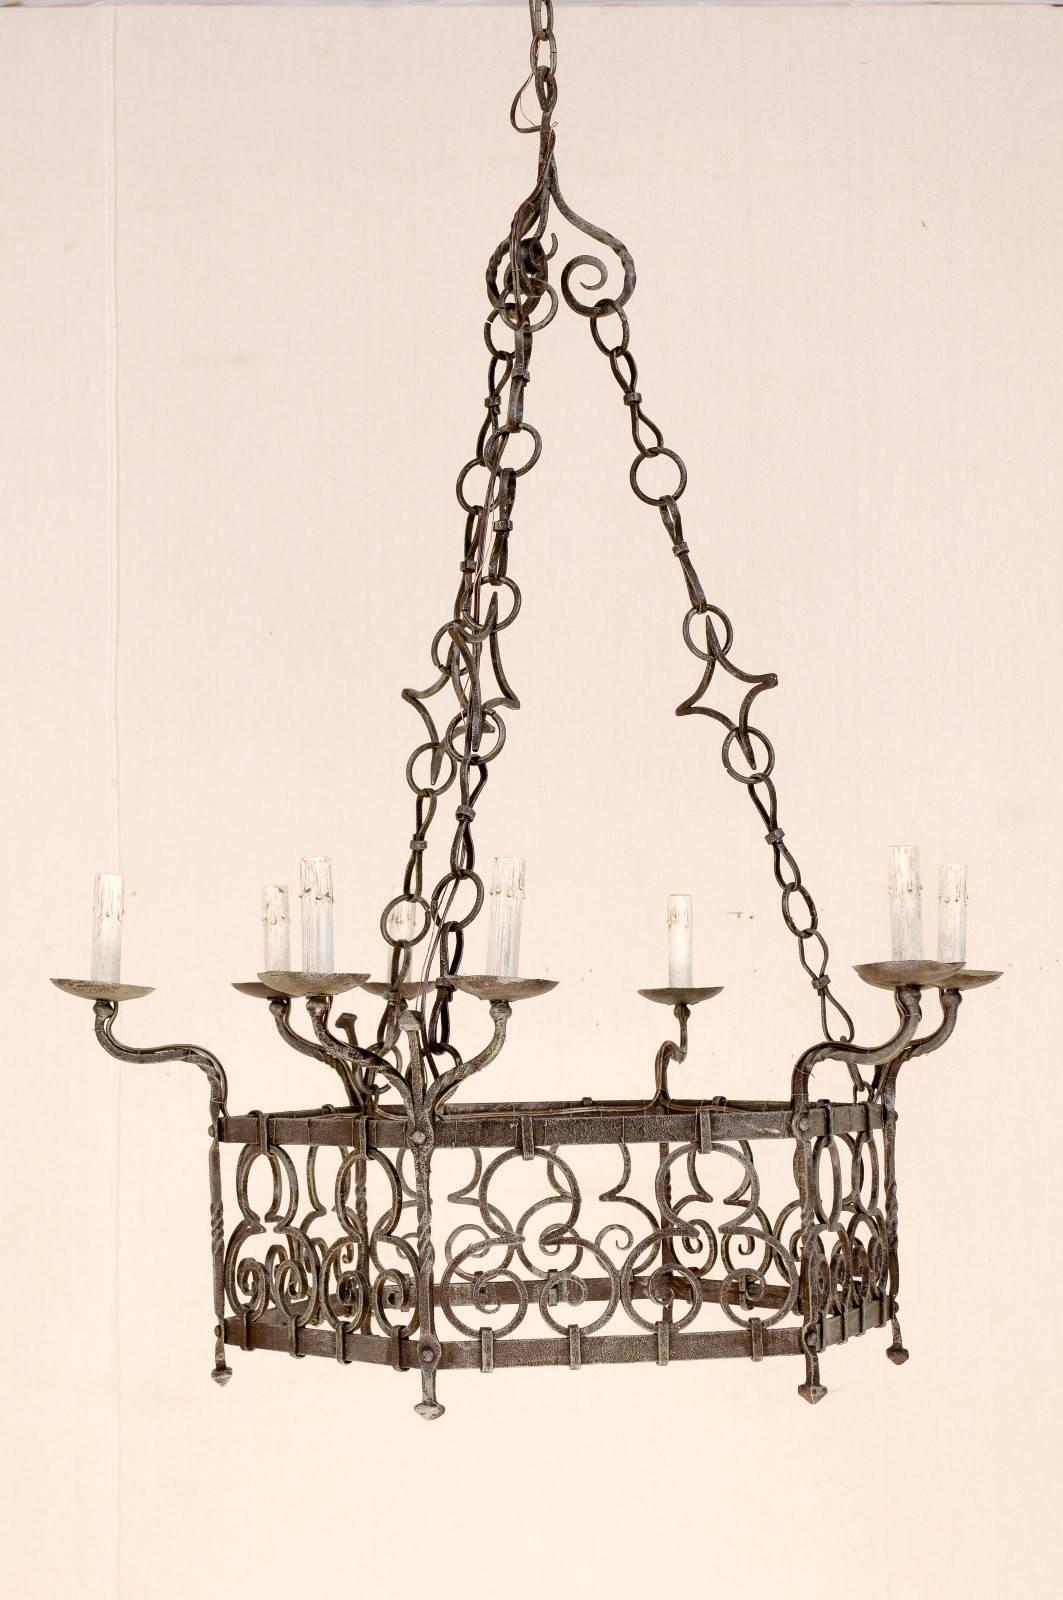 20th Century A Beautiful French Gothic Style Nine Light Vintage Iron Chandelier, Rewired